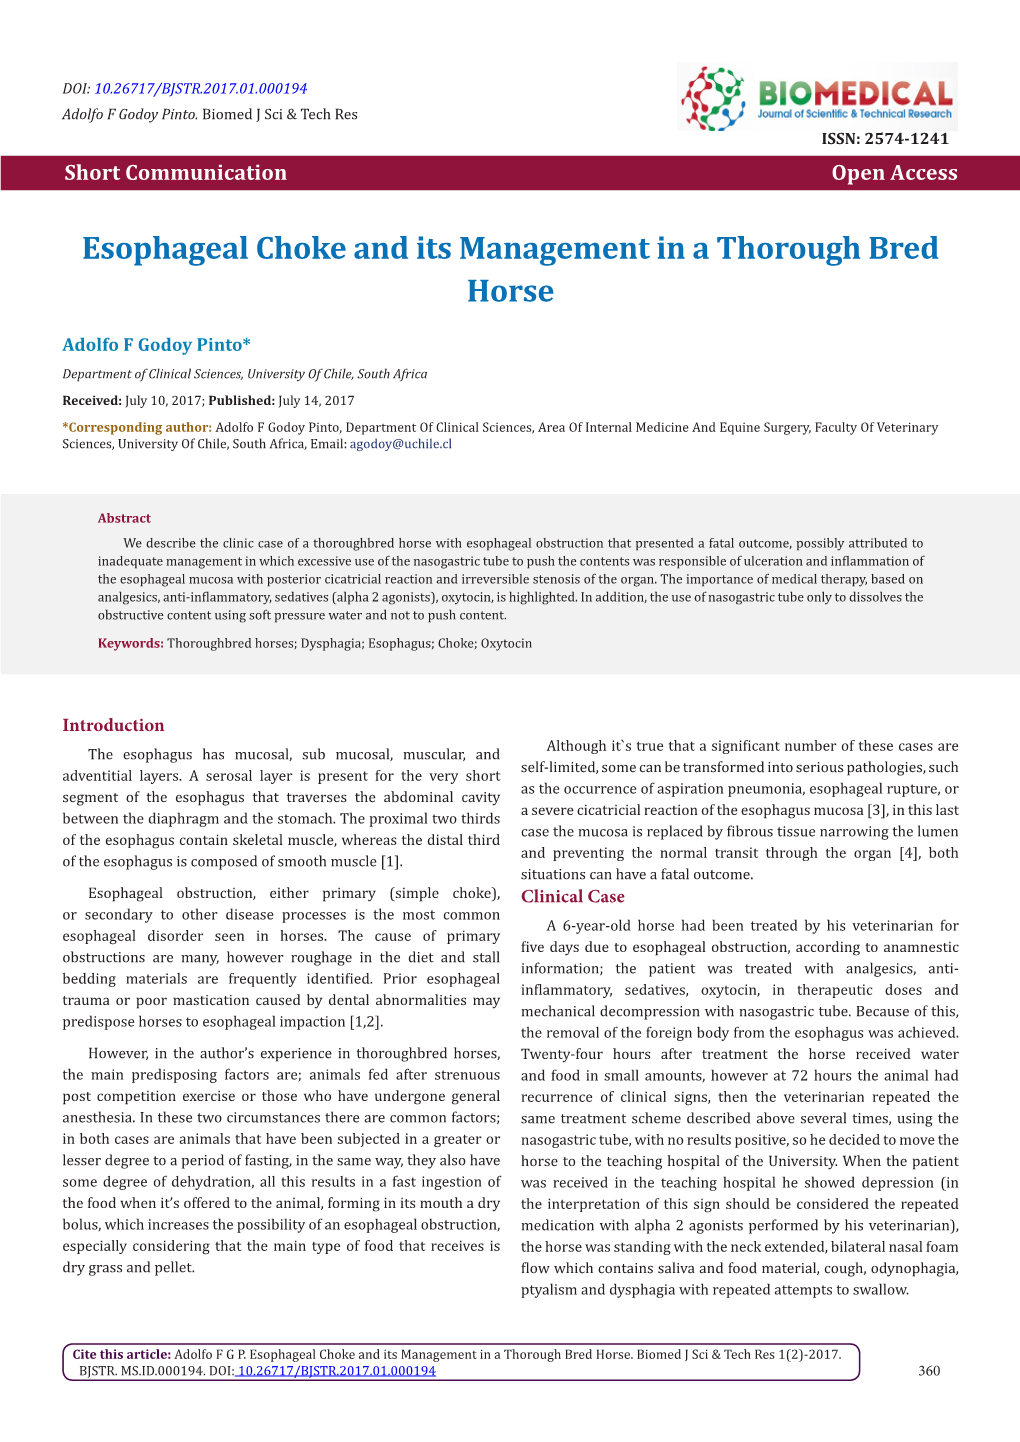 Esophageal Choke and Its Management in a Thorough Bred Horse